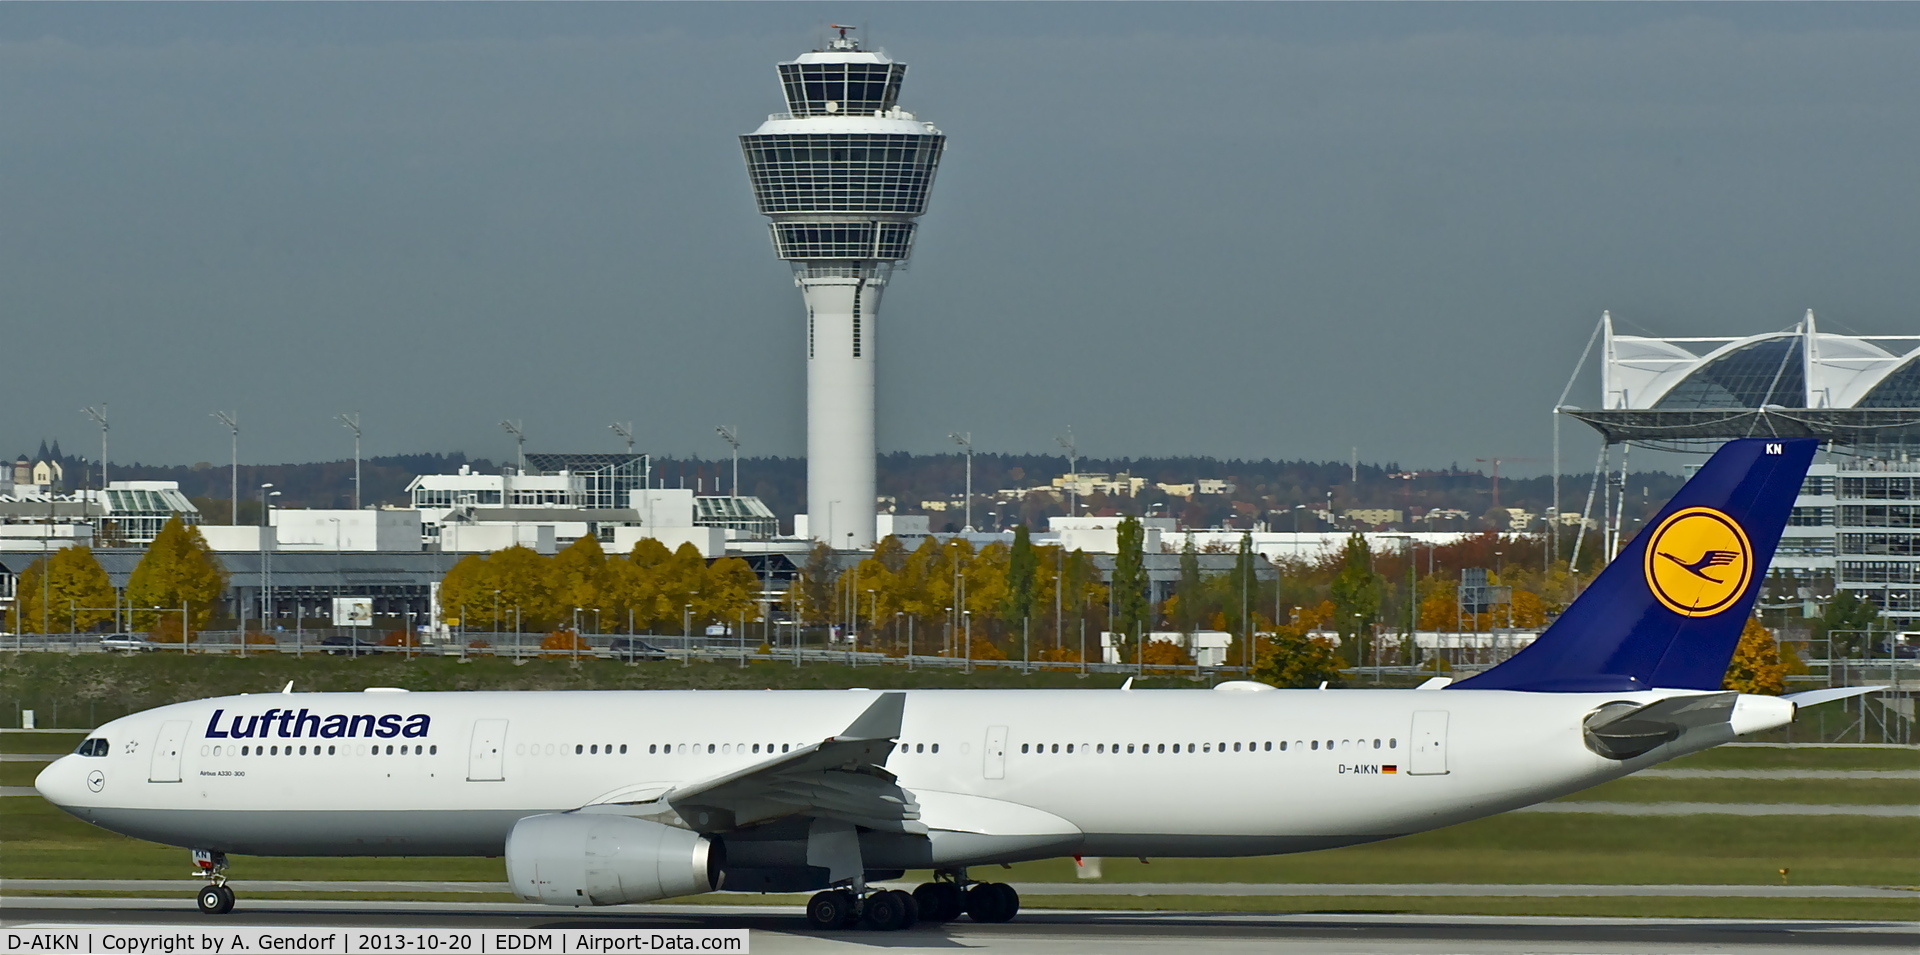 D-AIKN, 2008 Airbus A330-343X C/N 922, Lufthansa, is speeding up at München(EDDM), with the tower in the background